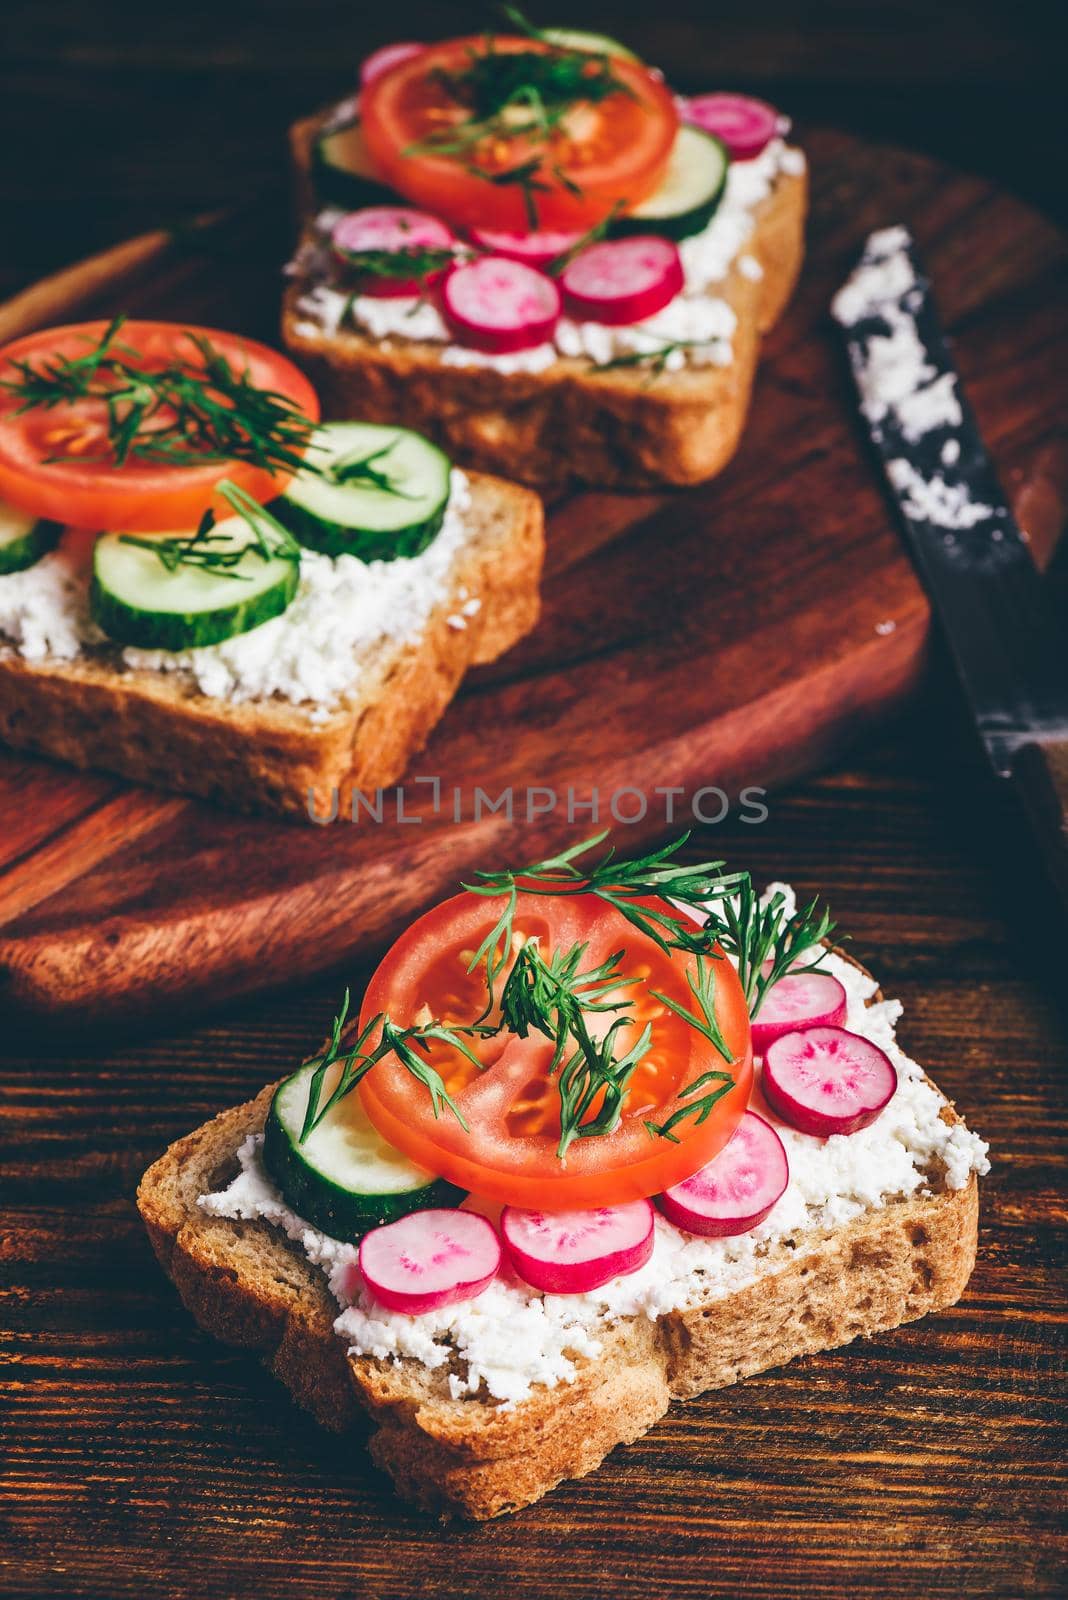 Vegetarian sandwiches with fresh sliced tomatoes, cucumber and radish